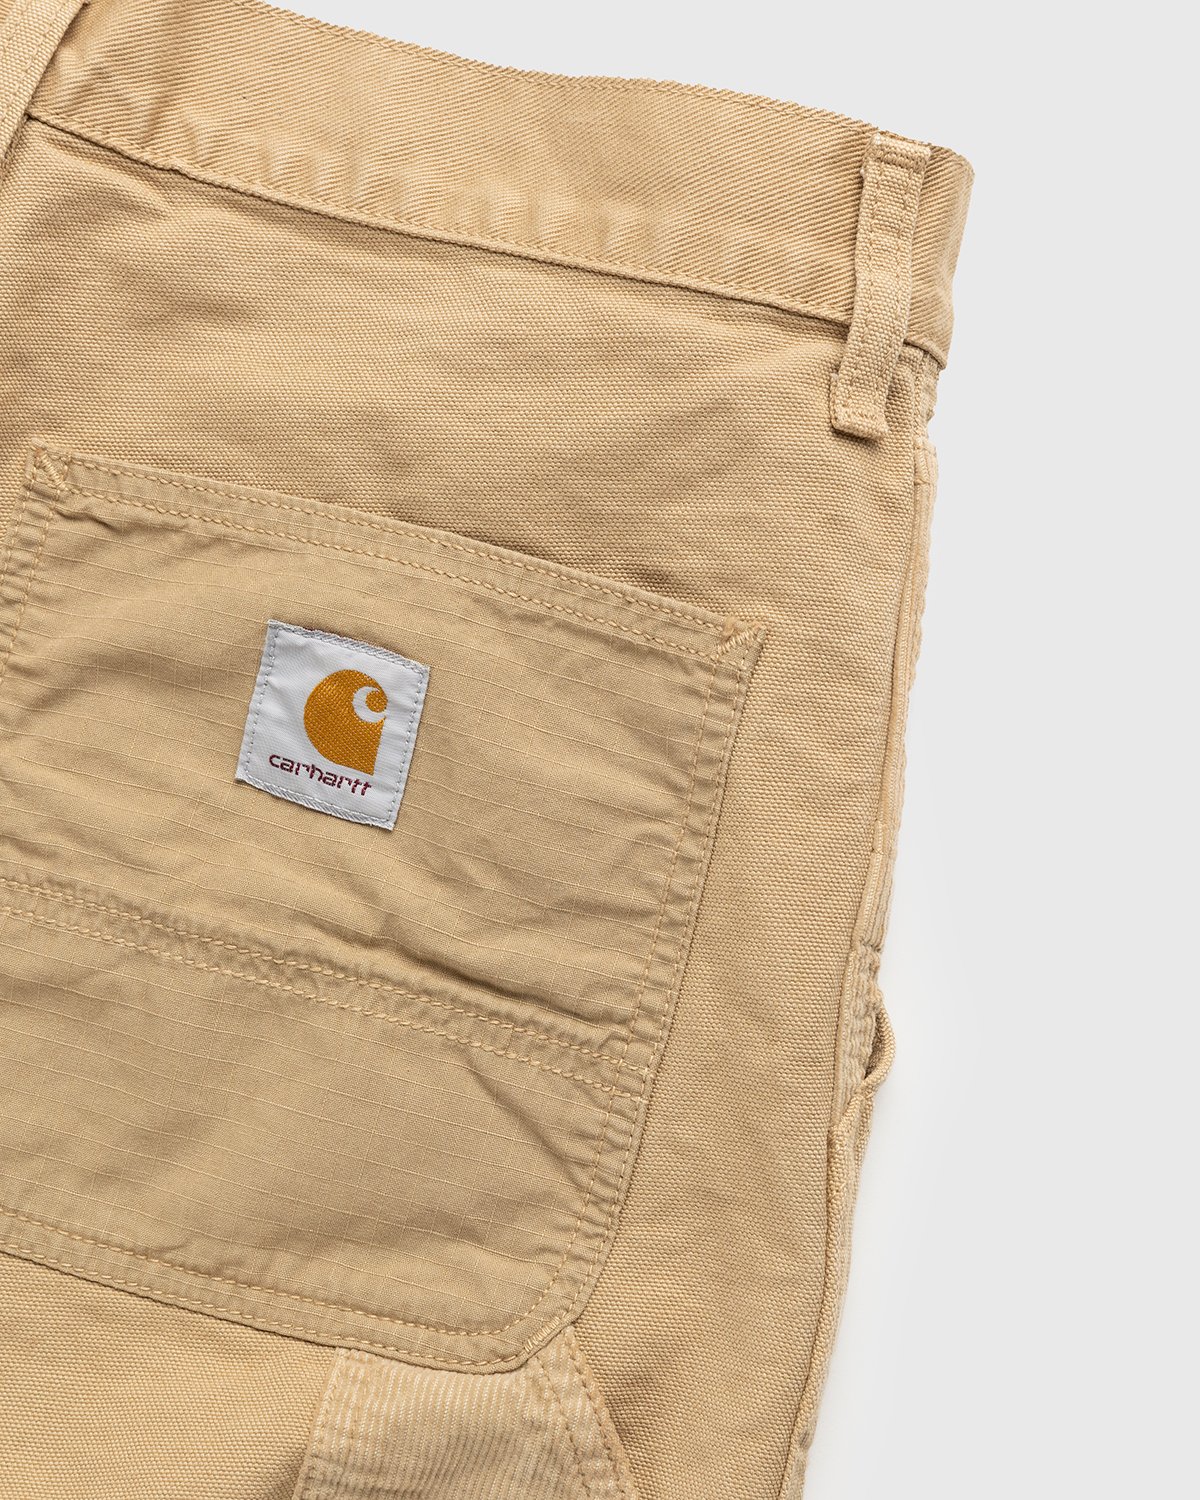 Carhartt WIP - Medley Pant Dusty Hamilton Brown Garment Dyed - Clothing - Brown - Image 3